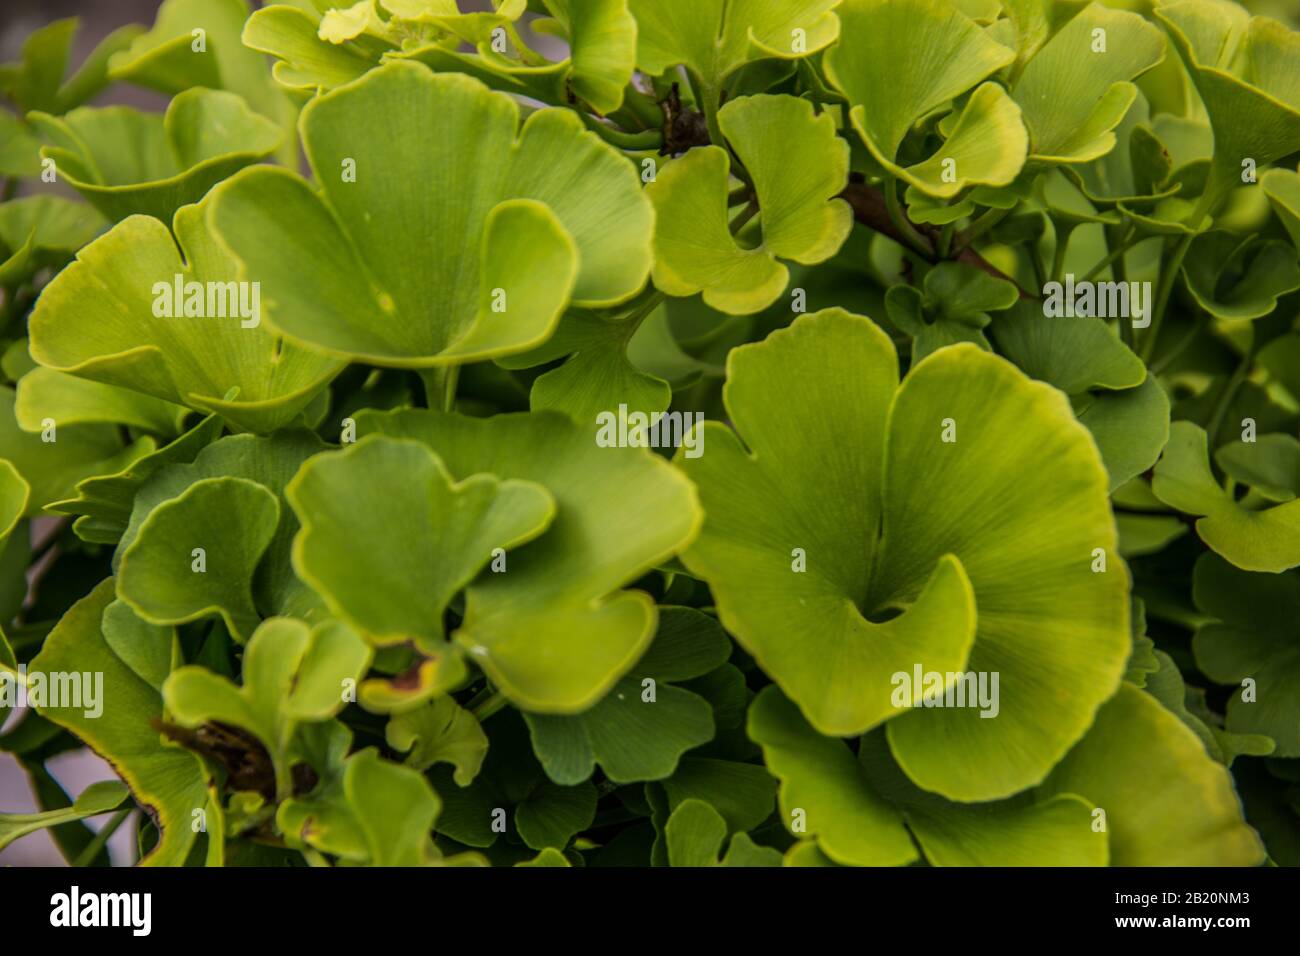 green ginko leaves from young plant Stock Photo